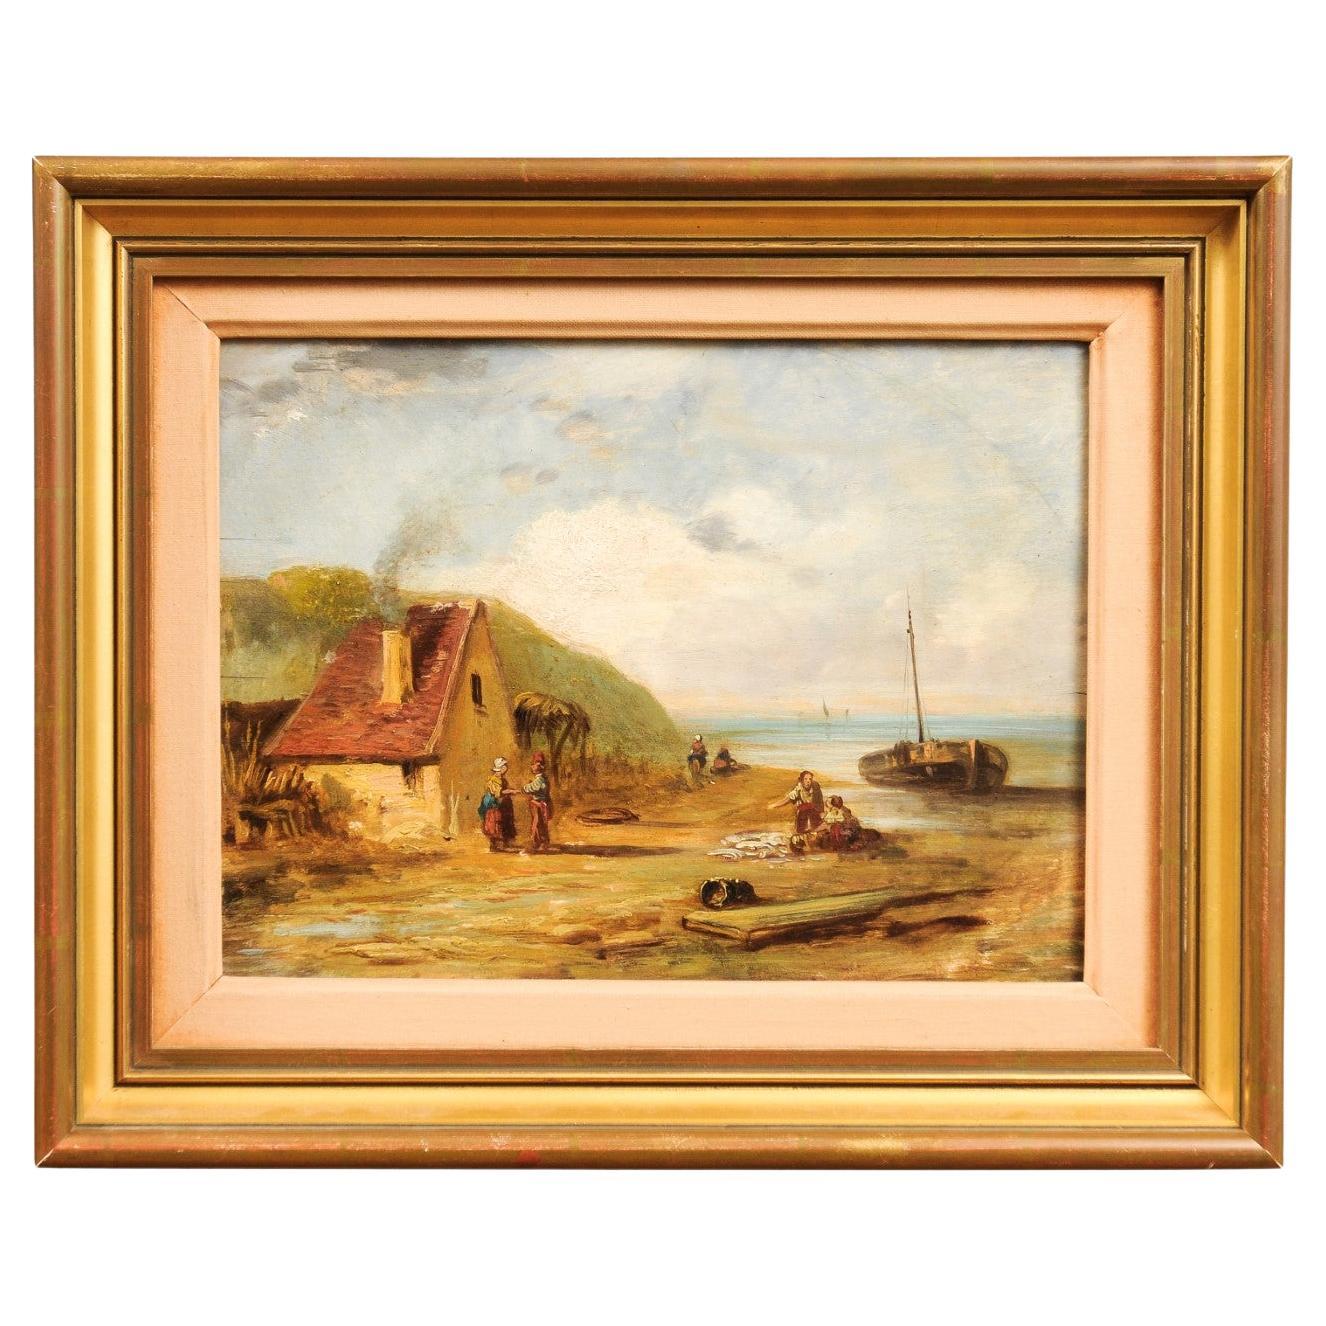 French 19th Century Framed Oil On Panel Painting Depicting a Village by the Sea For Sale